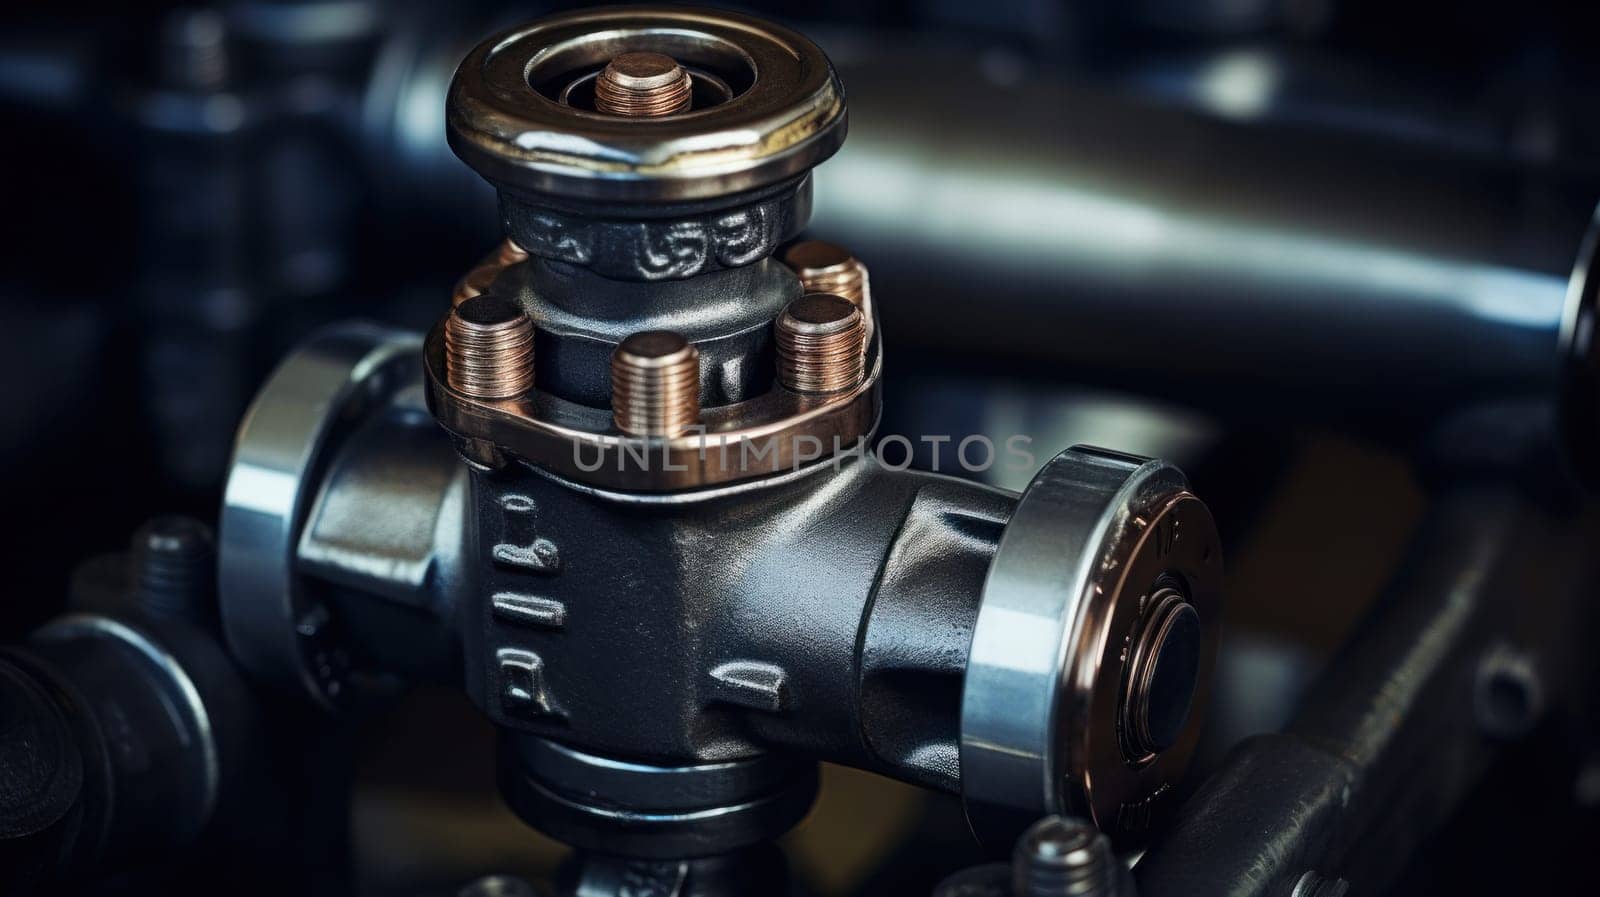 A close up of a valve with some pipes around it